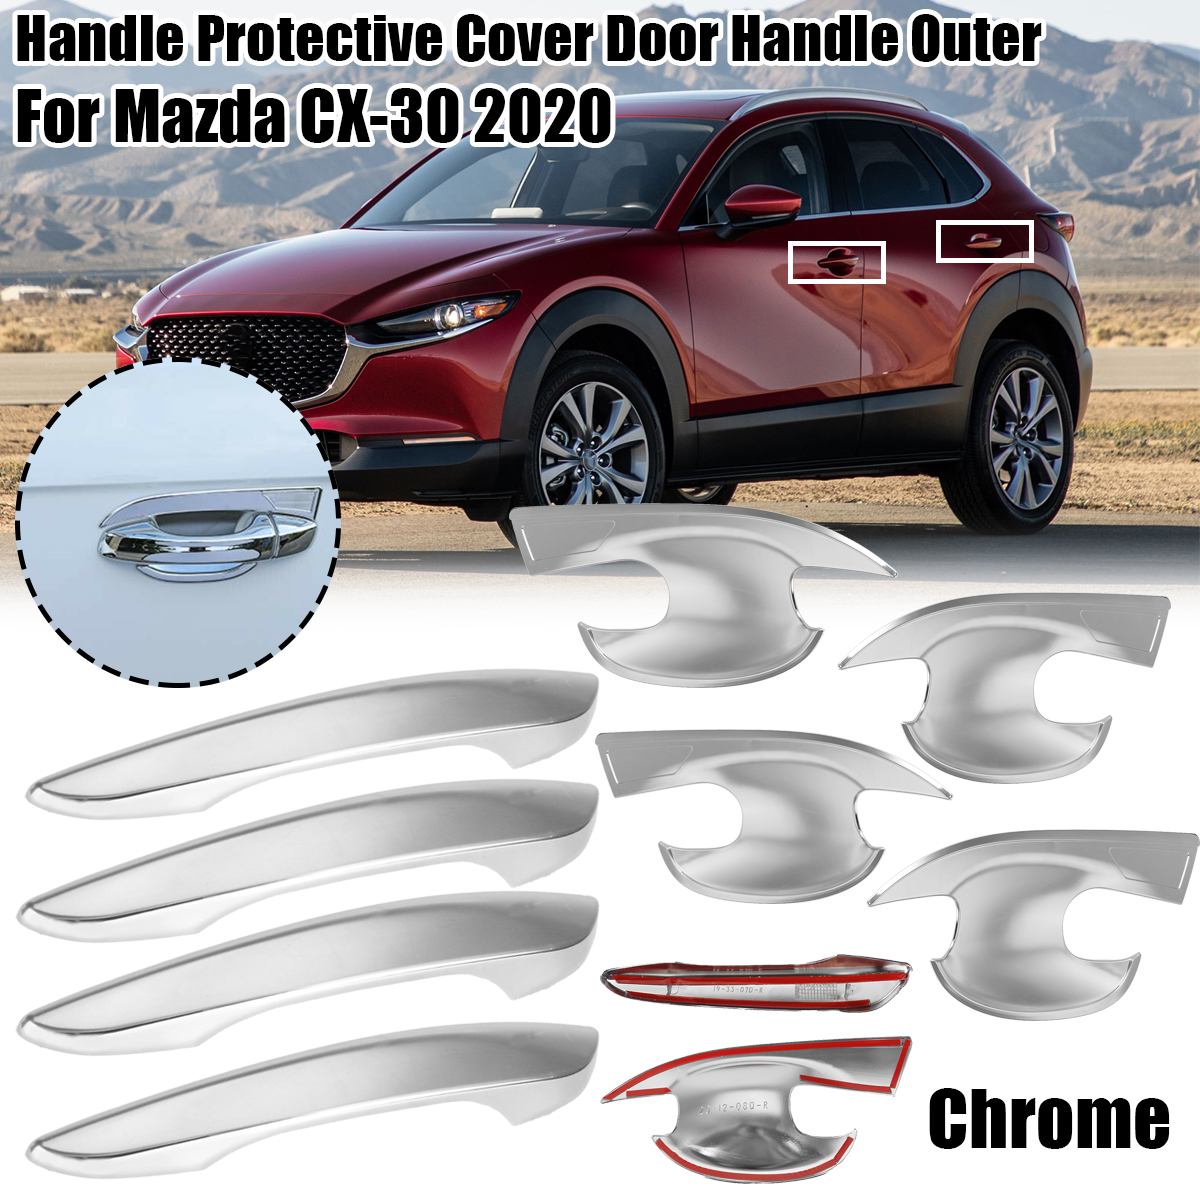 Chrome-Handle-Protective-Cover-Door-Handle-Outer-Bowls-Trim-For-Mazda-CX-30-2020-1751667-2